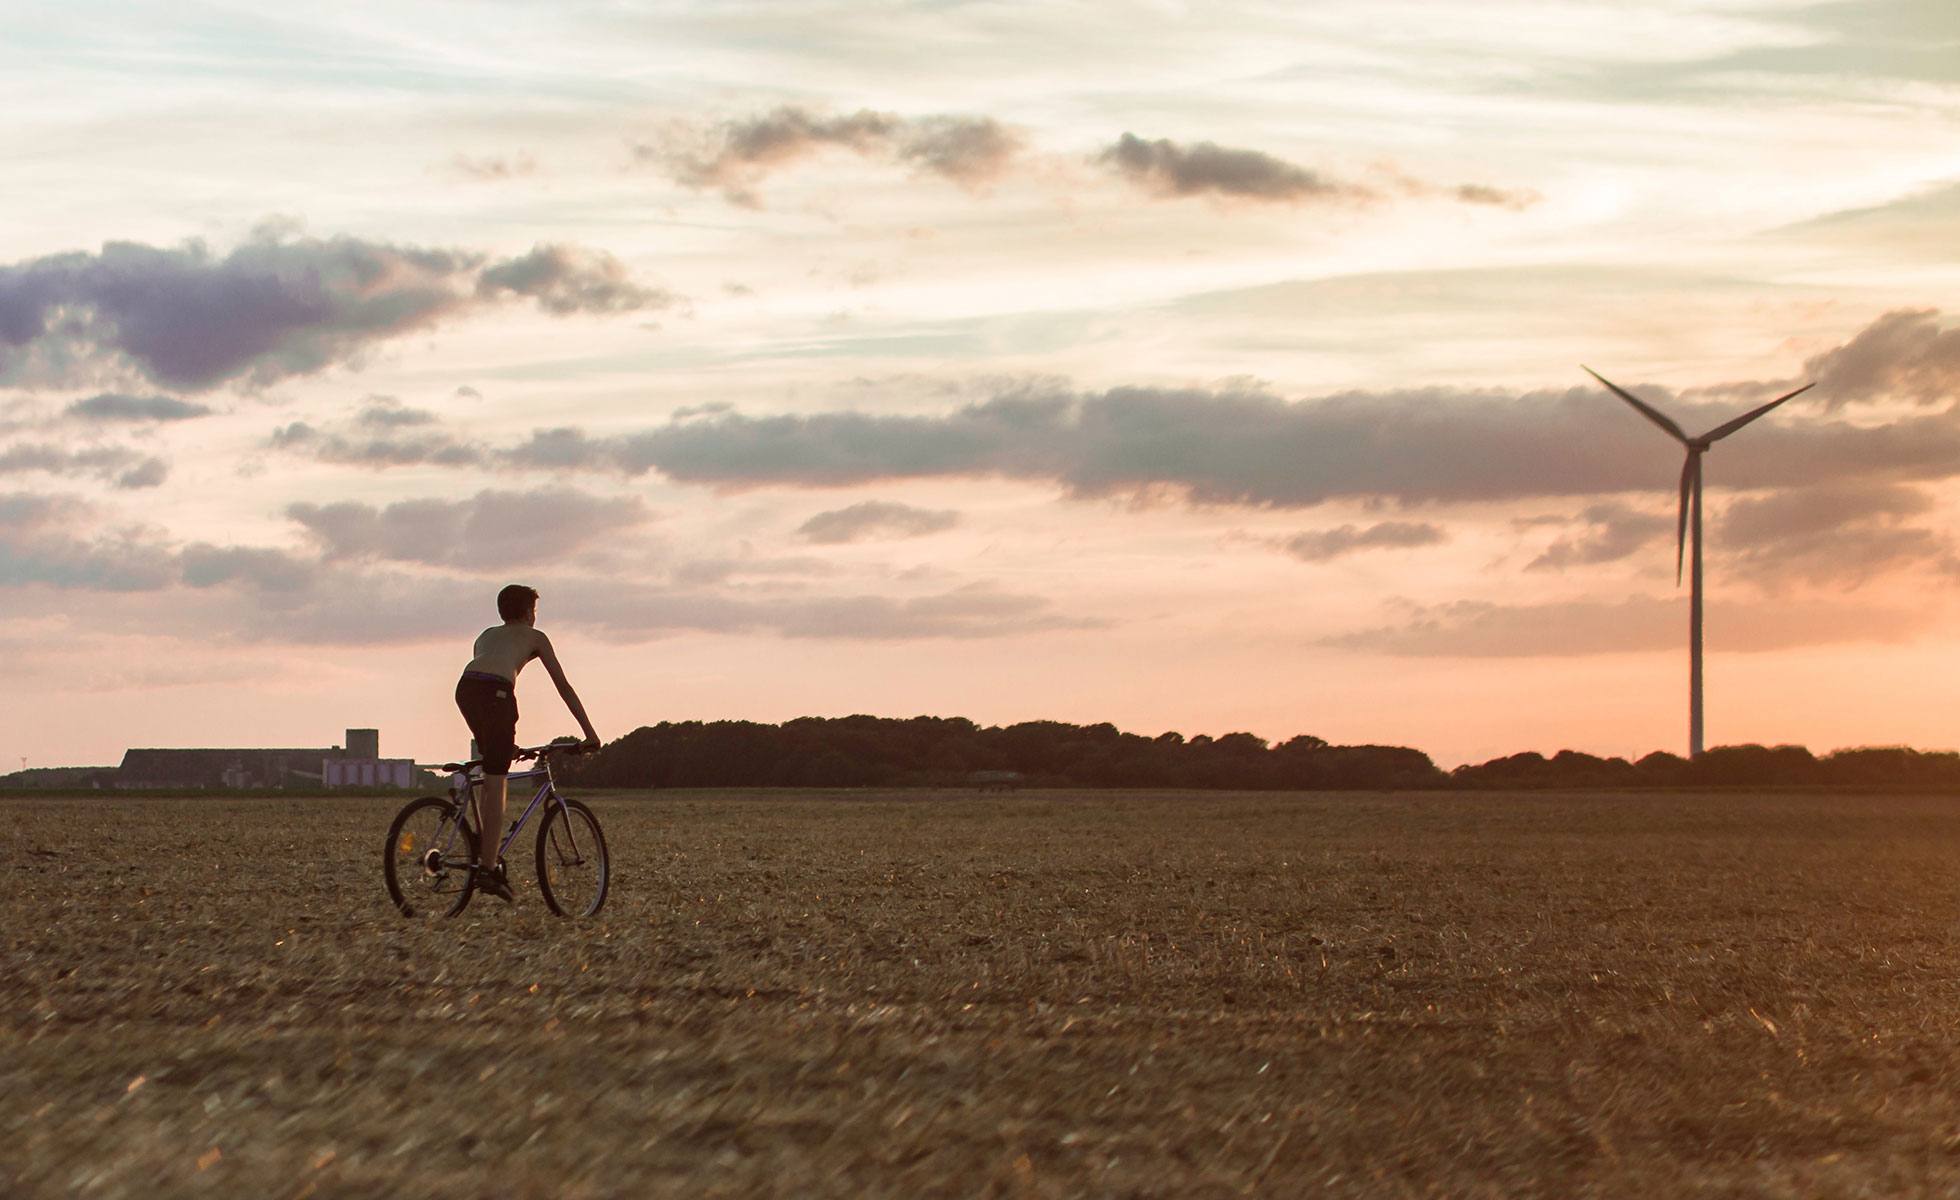 Cyclist in a field with wind turbine